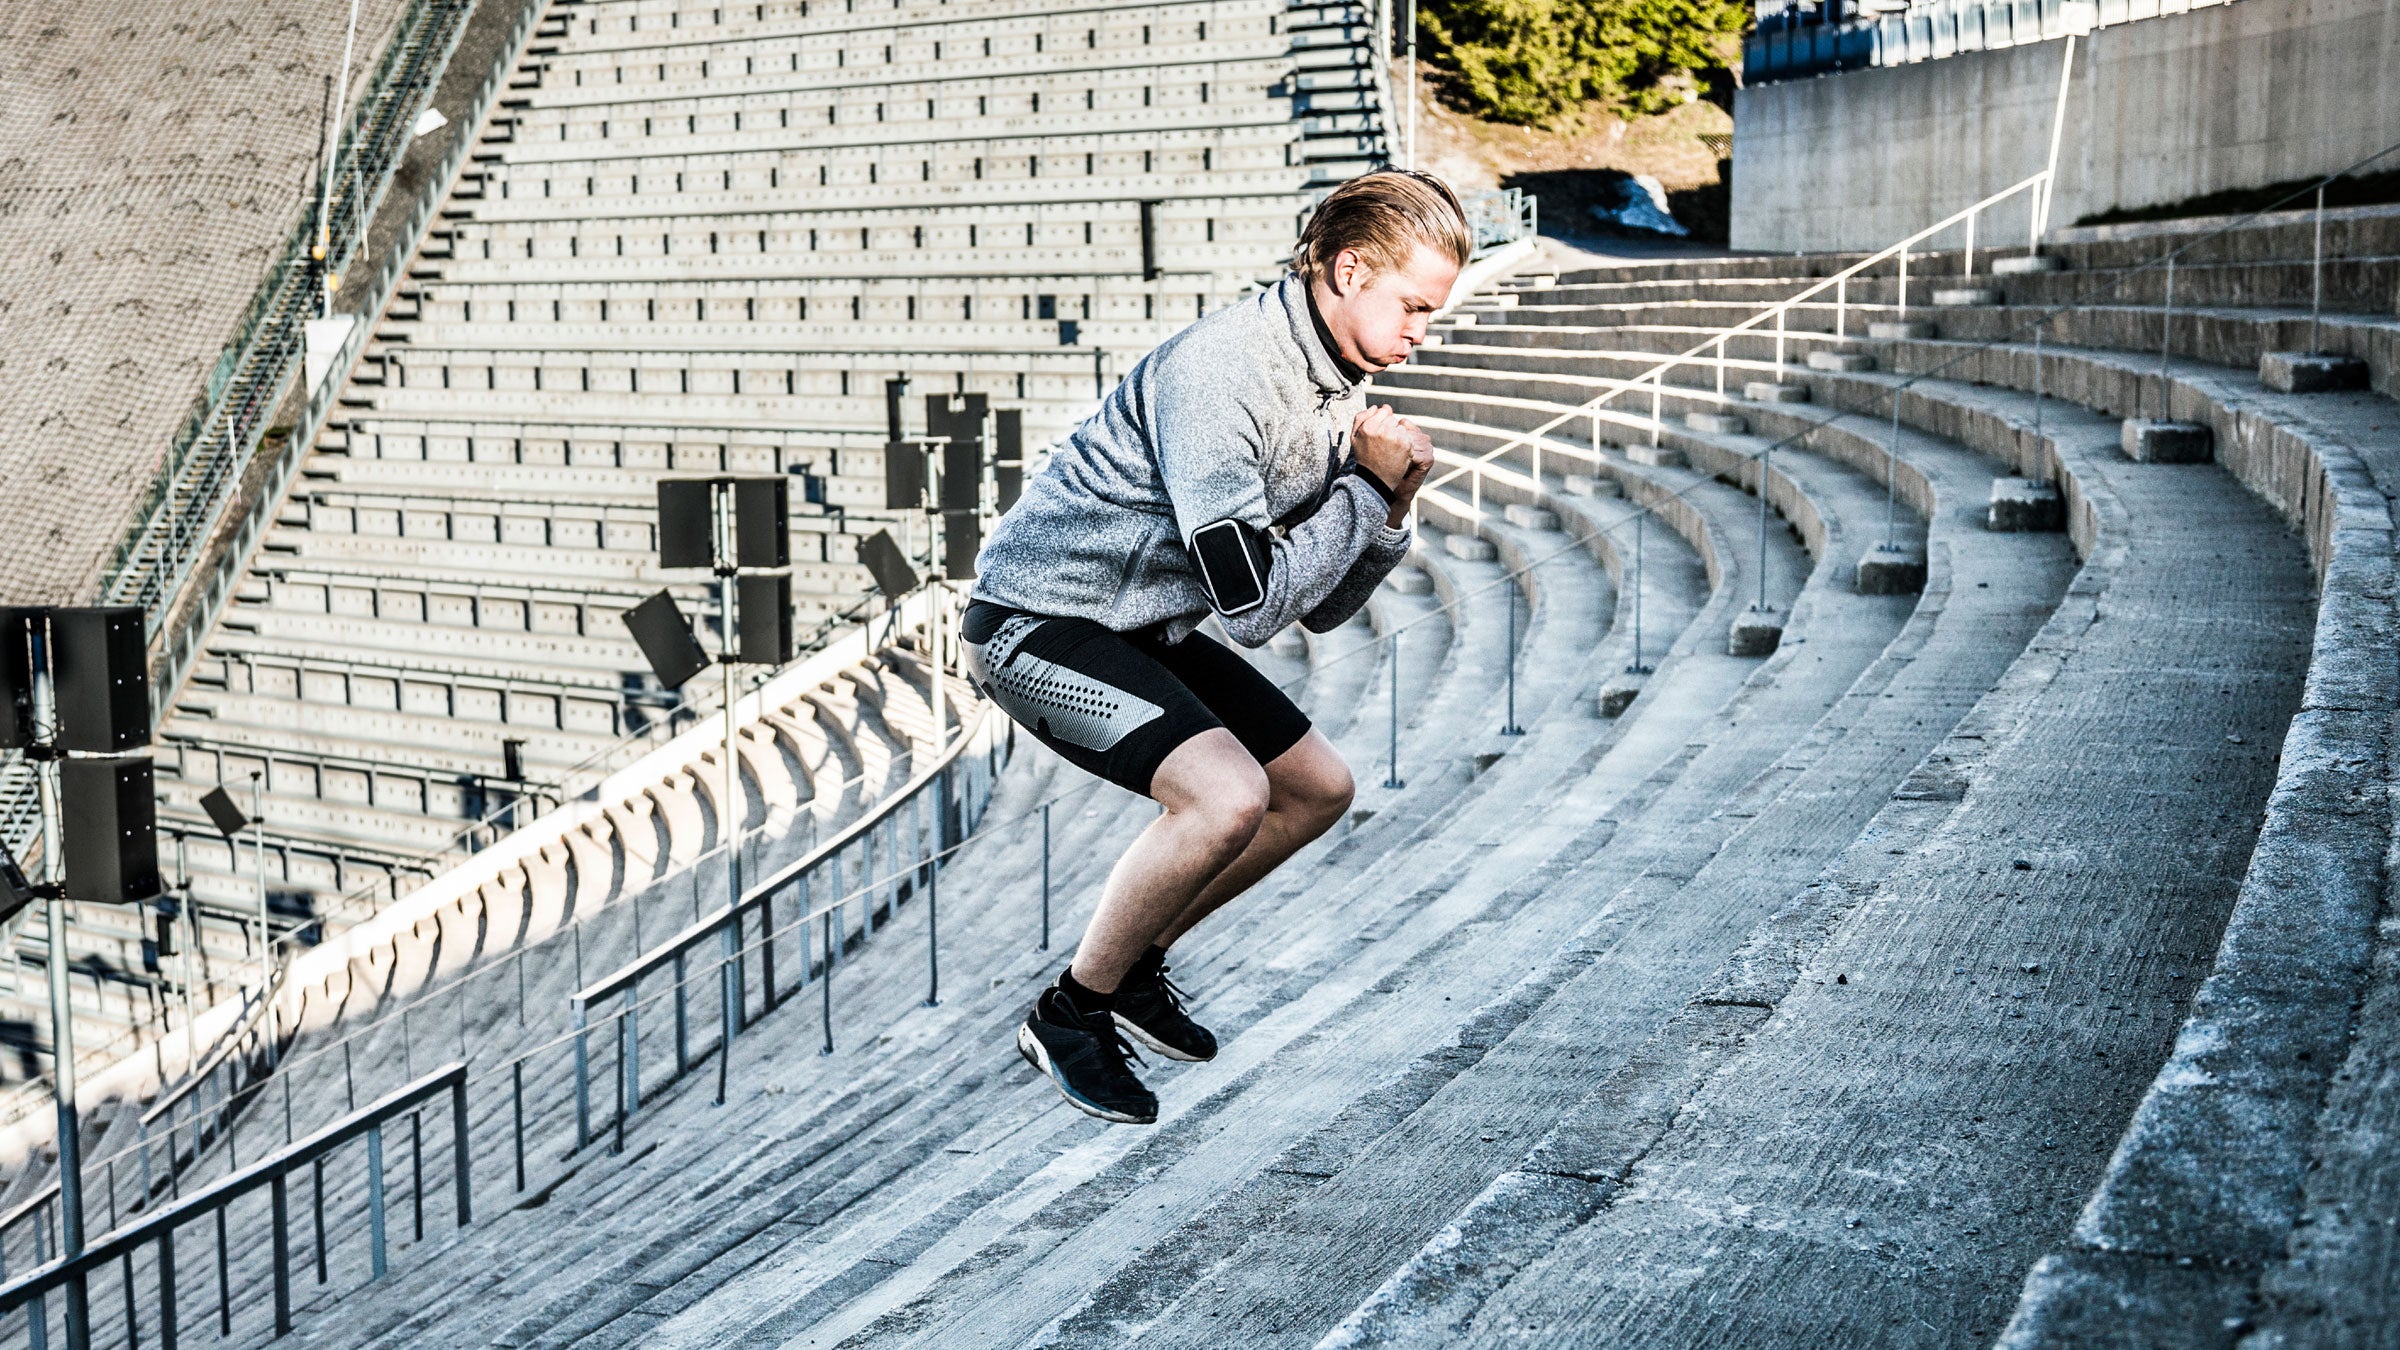 The Ultimate Lung-Busting Stadium Workout